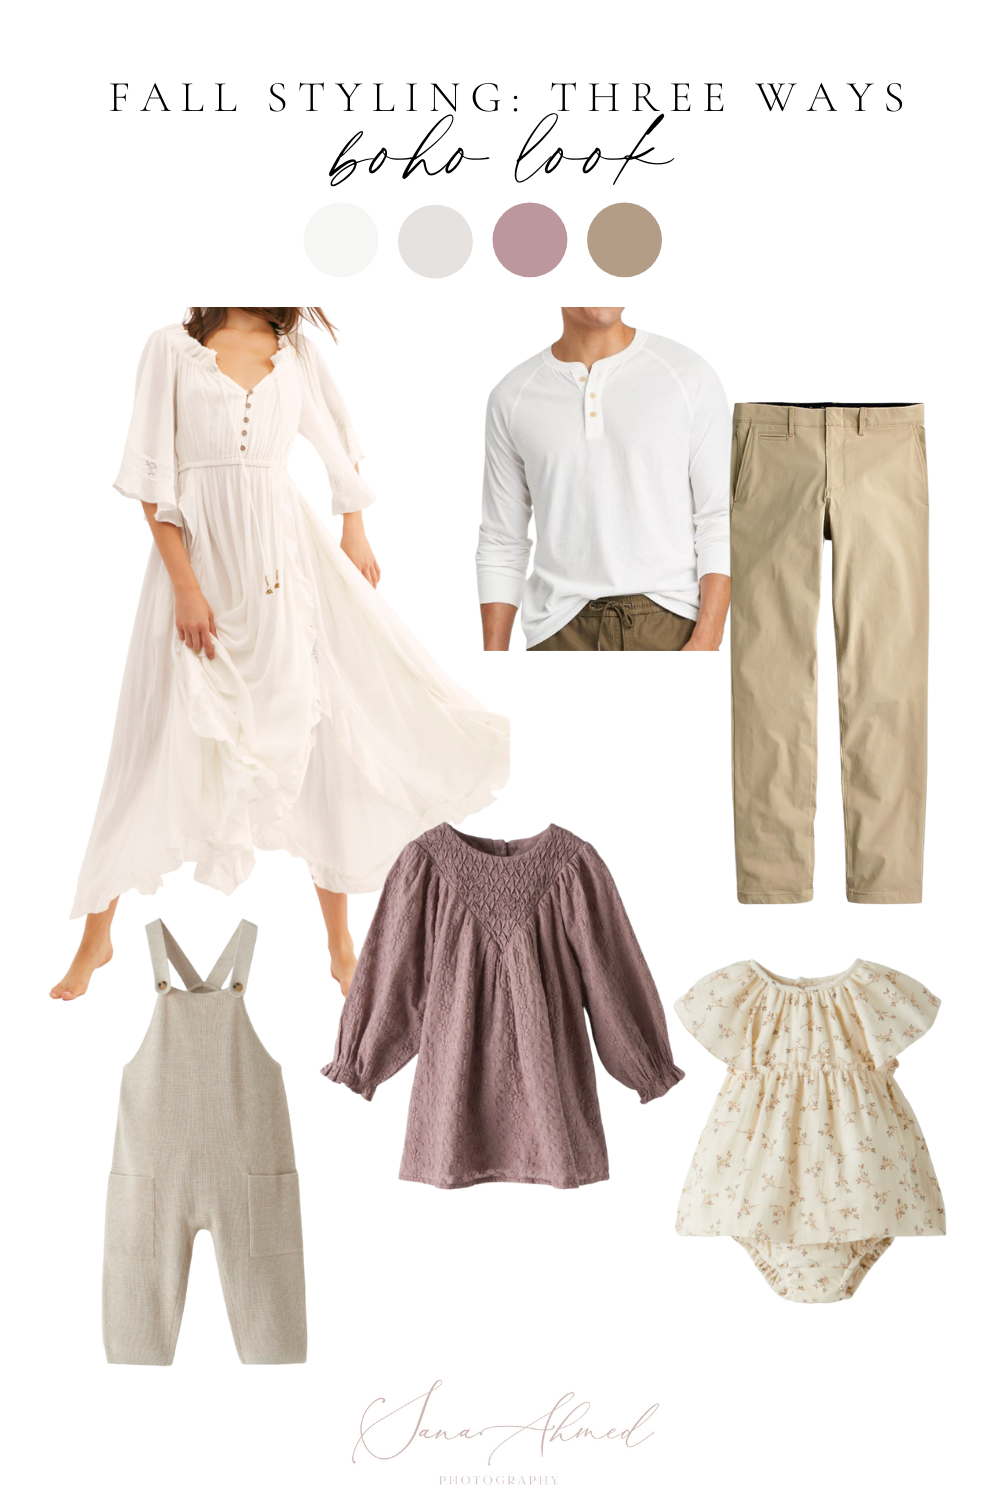 Outfit suggestions for what to wear during your Fall family photo session. Options provided by Sana Ahmed Photography.